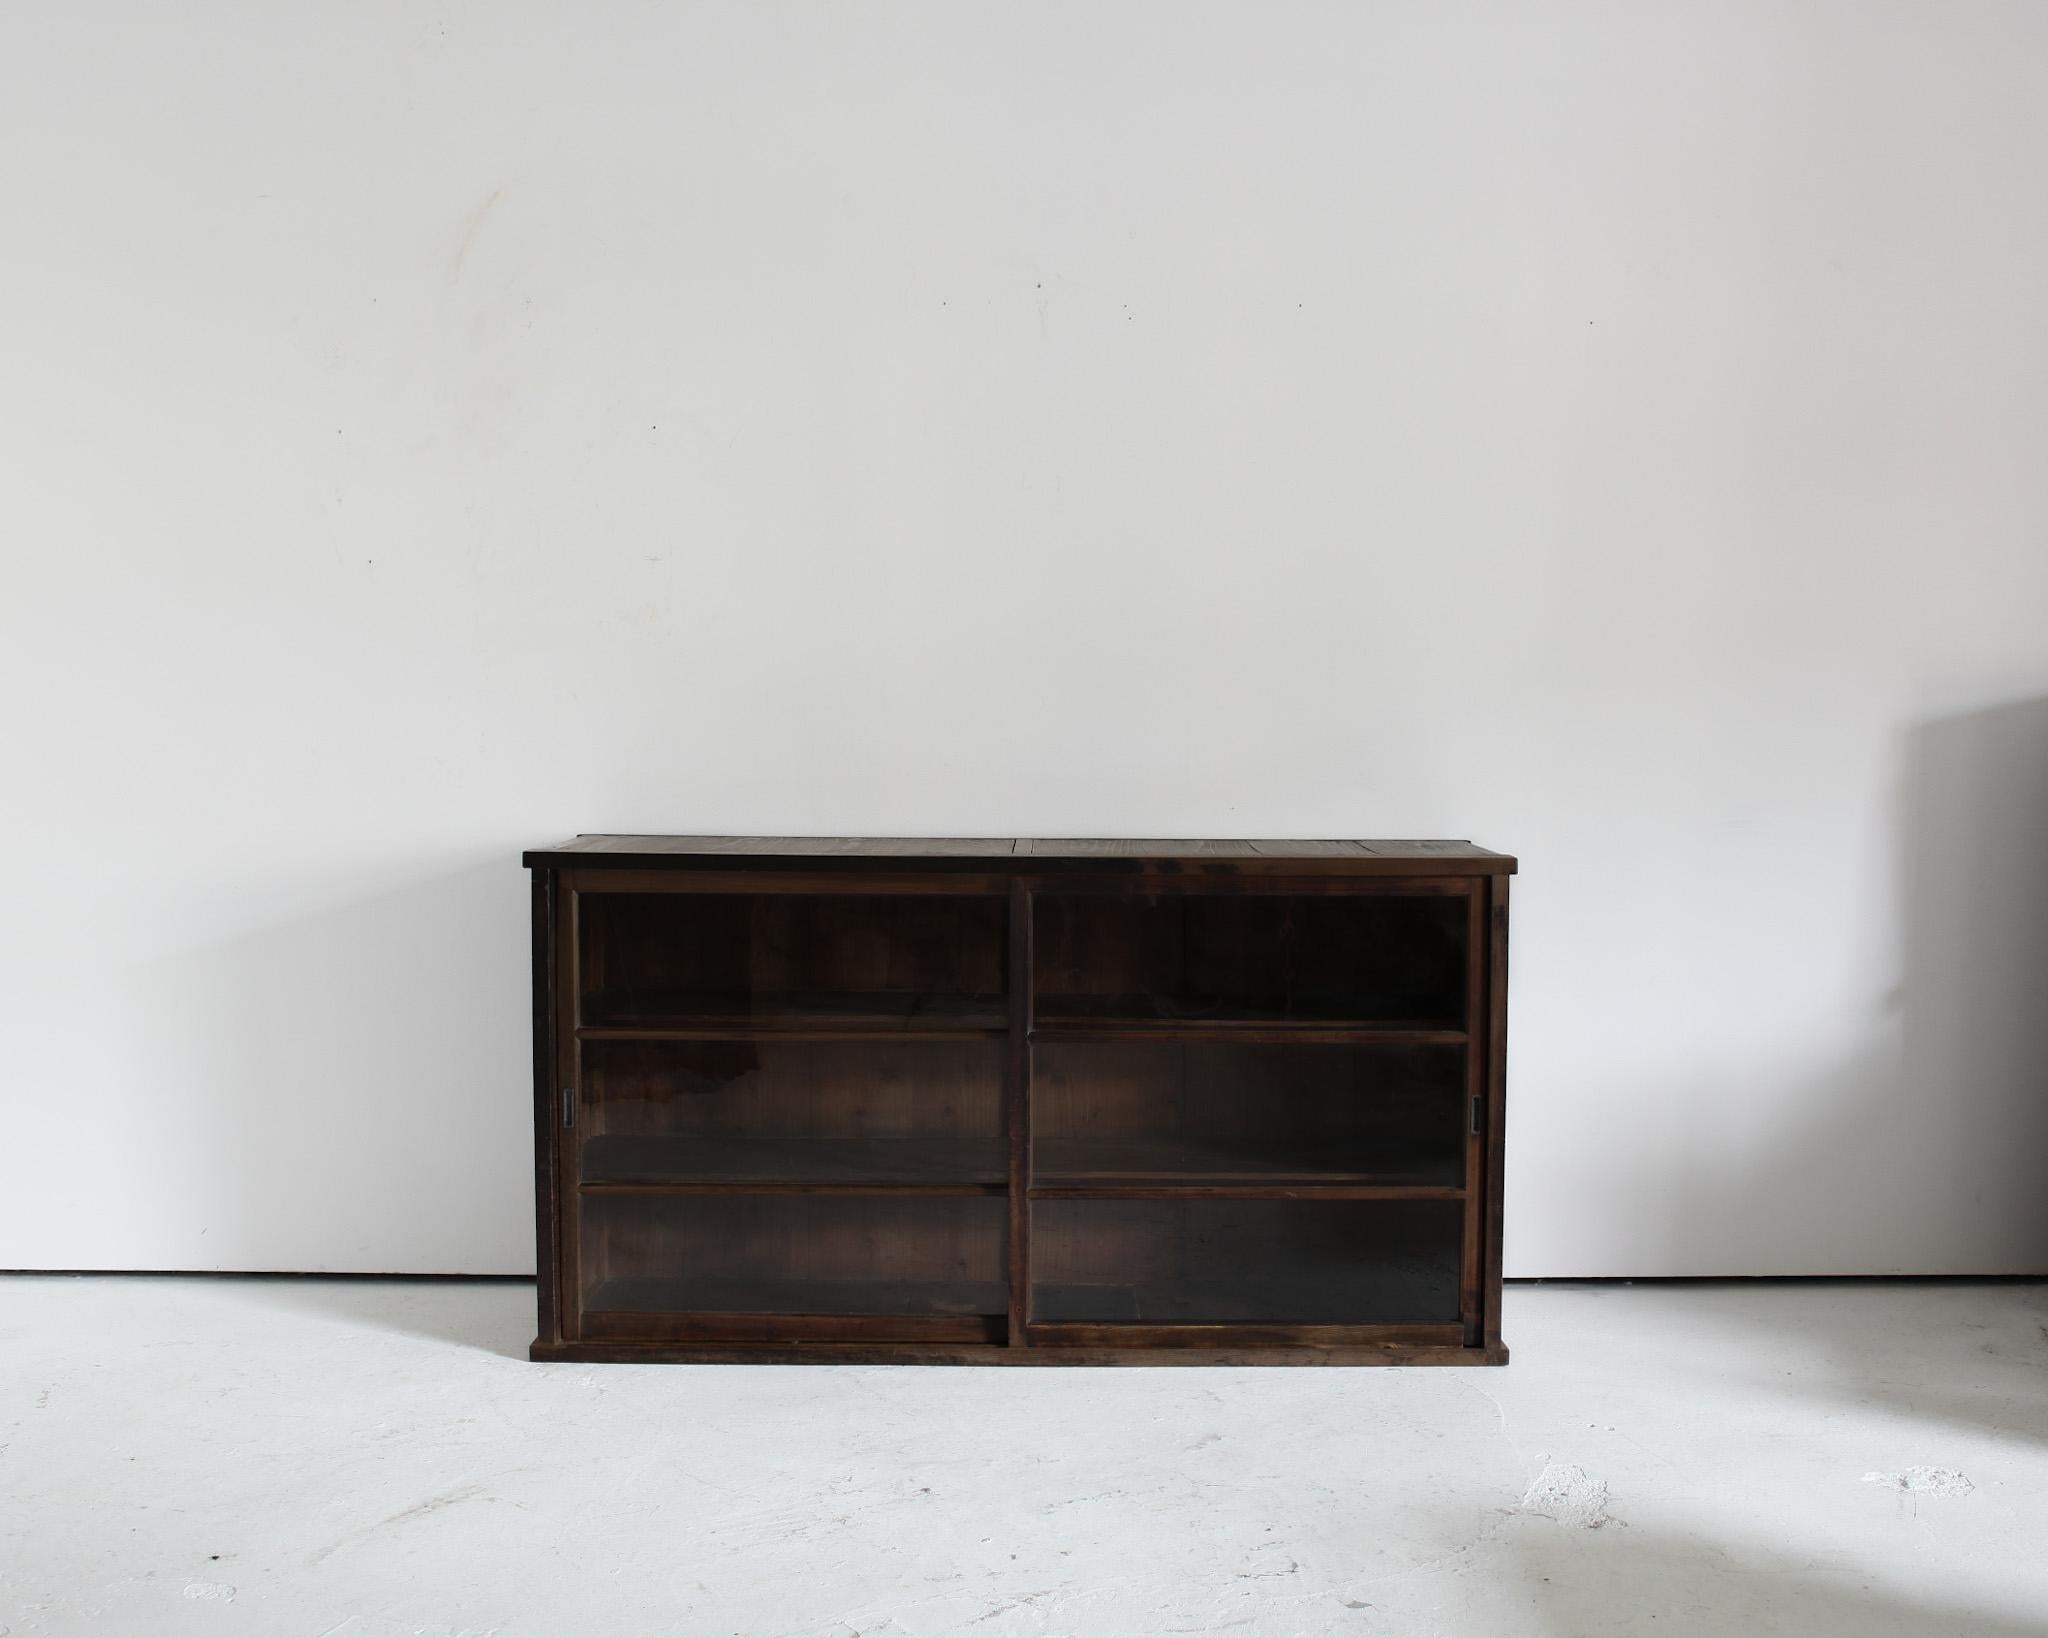 A late Meiji period Japanese tansu sideboard.

Constructed in cedar with original wavy glass sliding doors (one pane has been replaced).

Heavily patinated with two interior shelves.